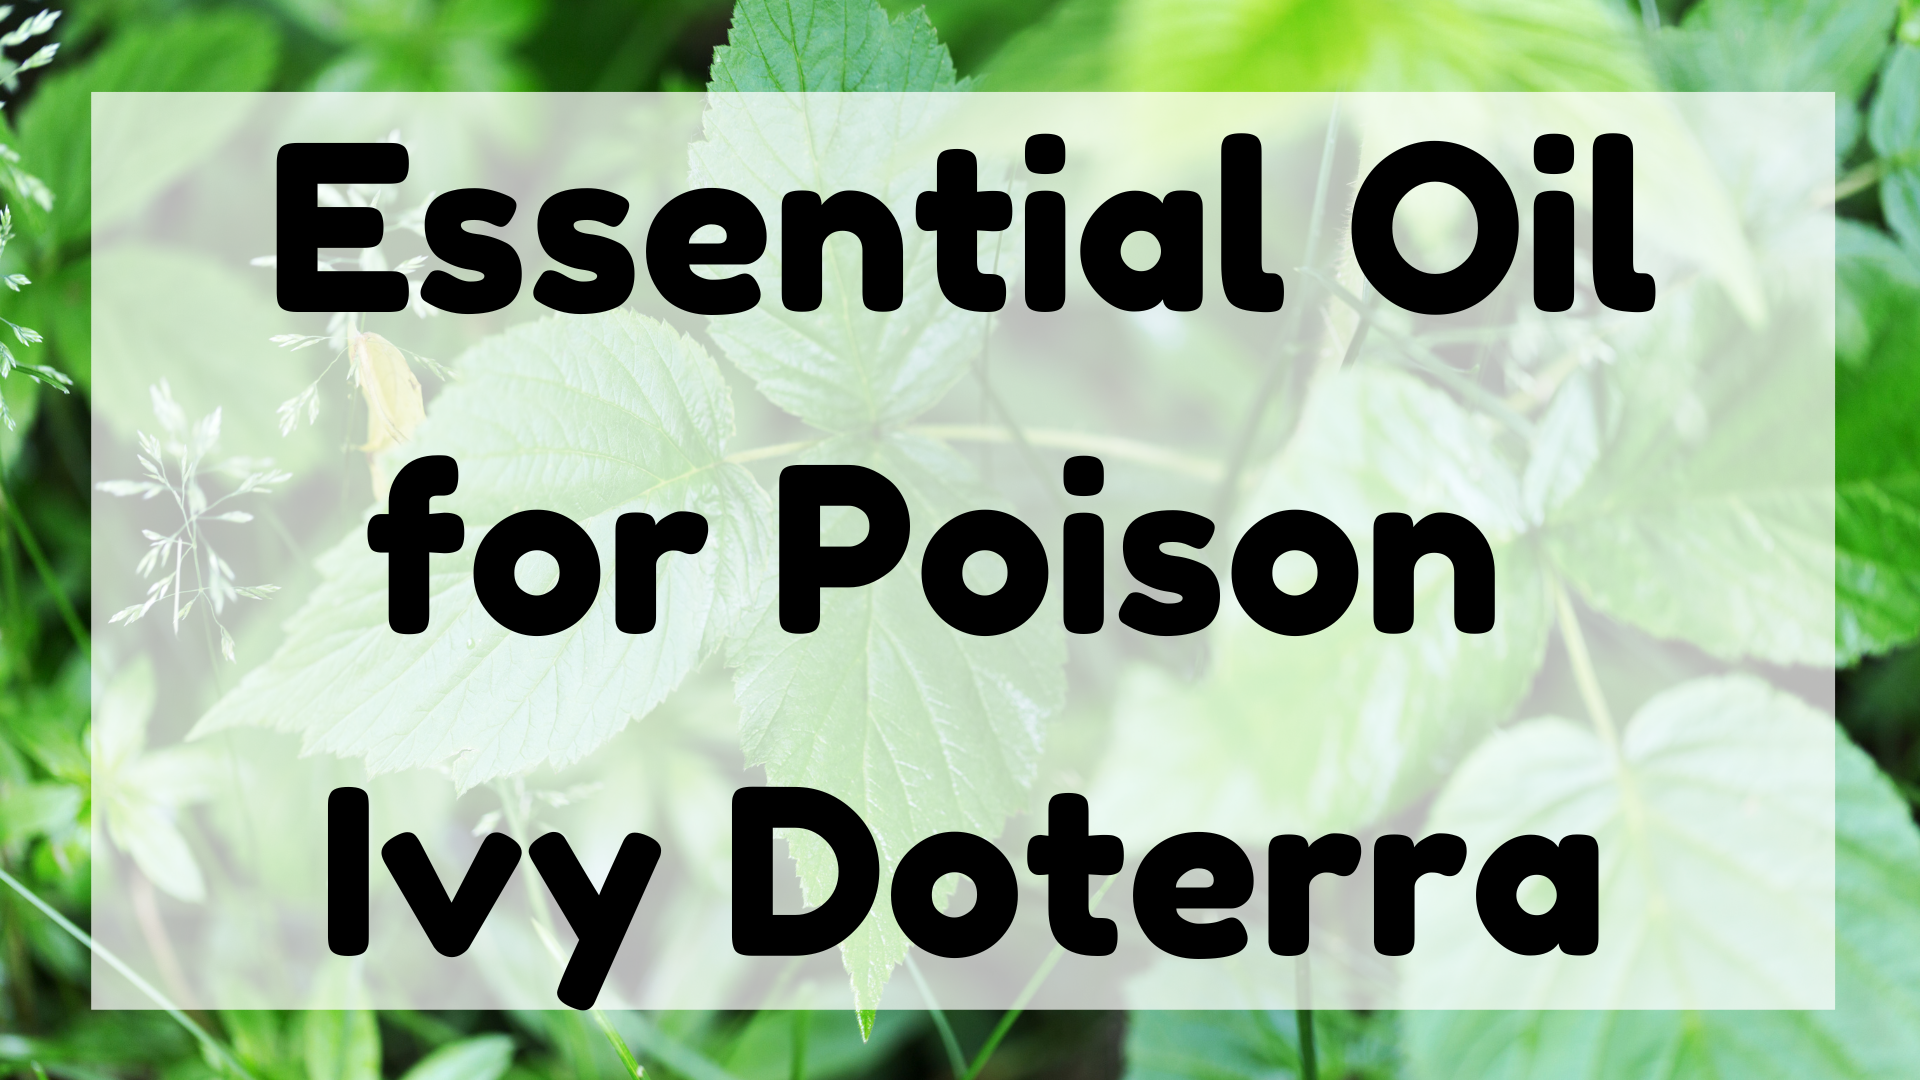 Essential Oil for Poison Ivy Doterra featured image